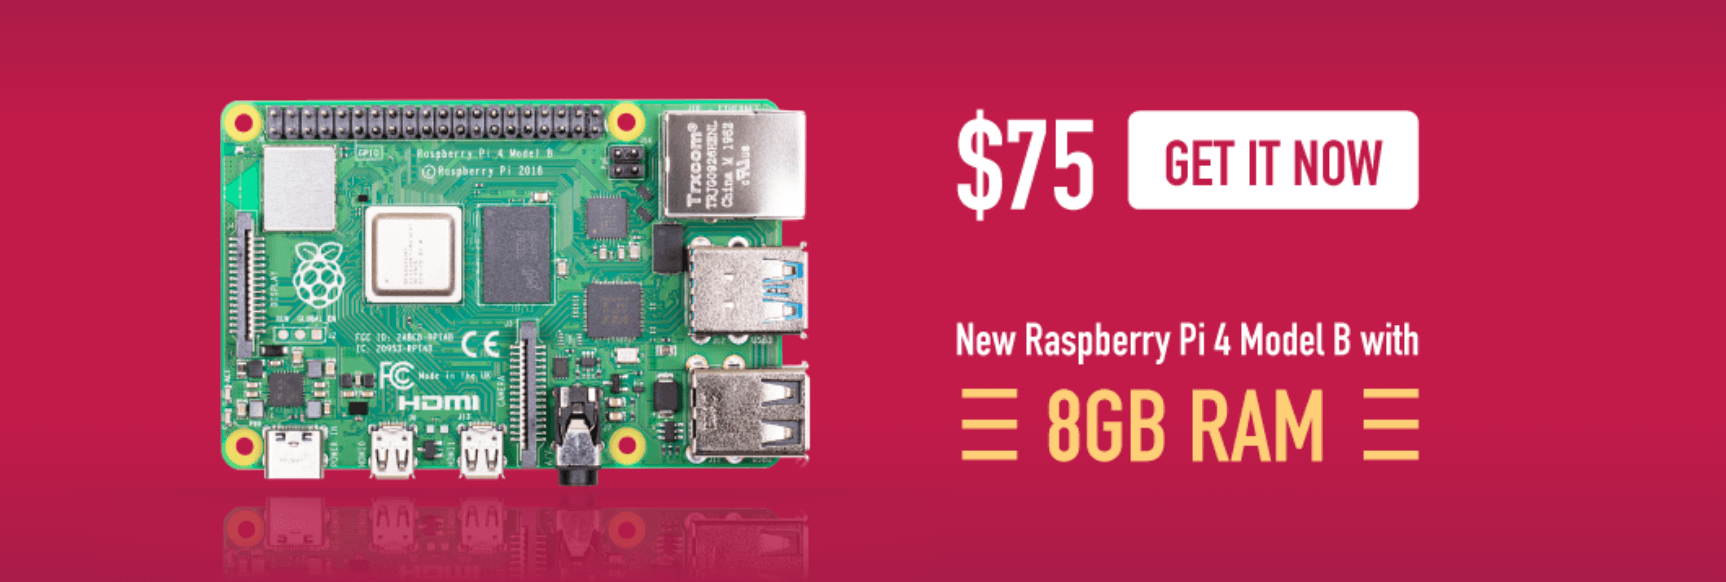 Meet The Brand New Raspberry Pi 4 8GB - Latest Open Tech From Seeed